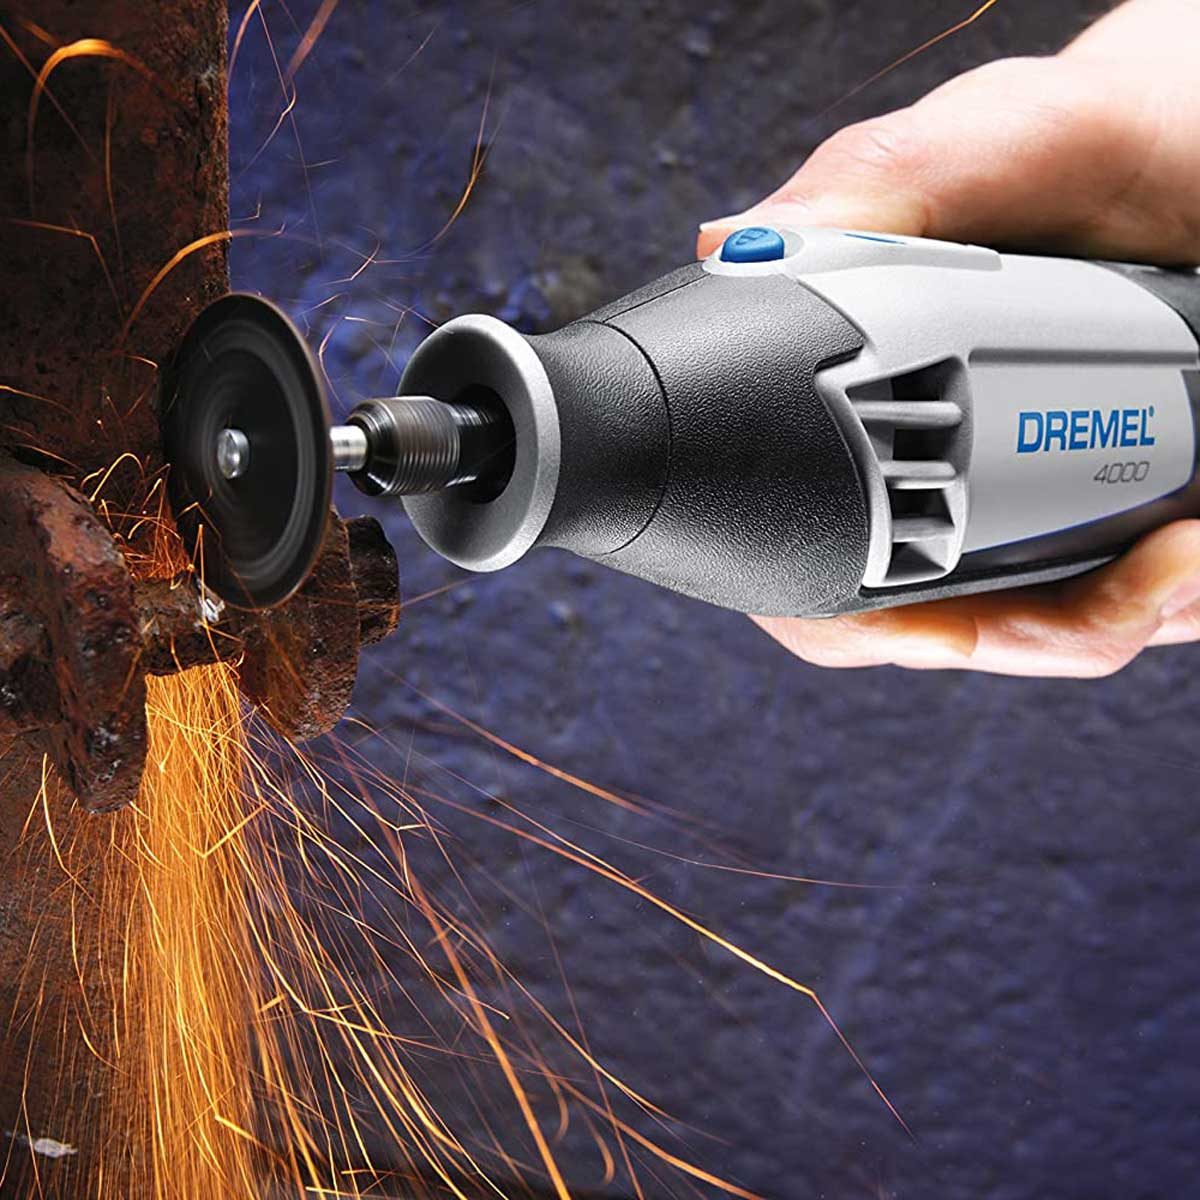 The Pro's Guide to Rotary Tools